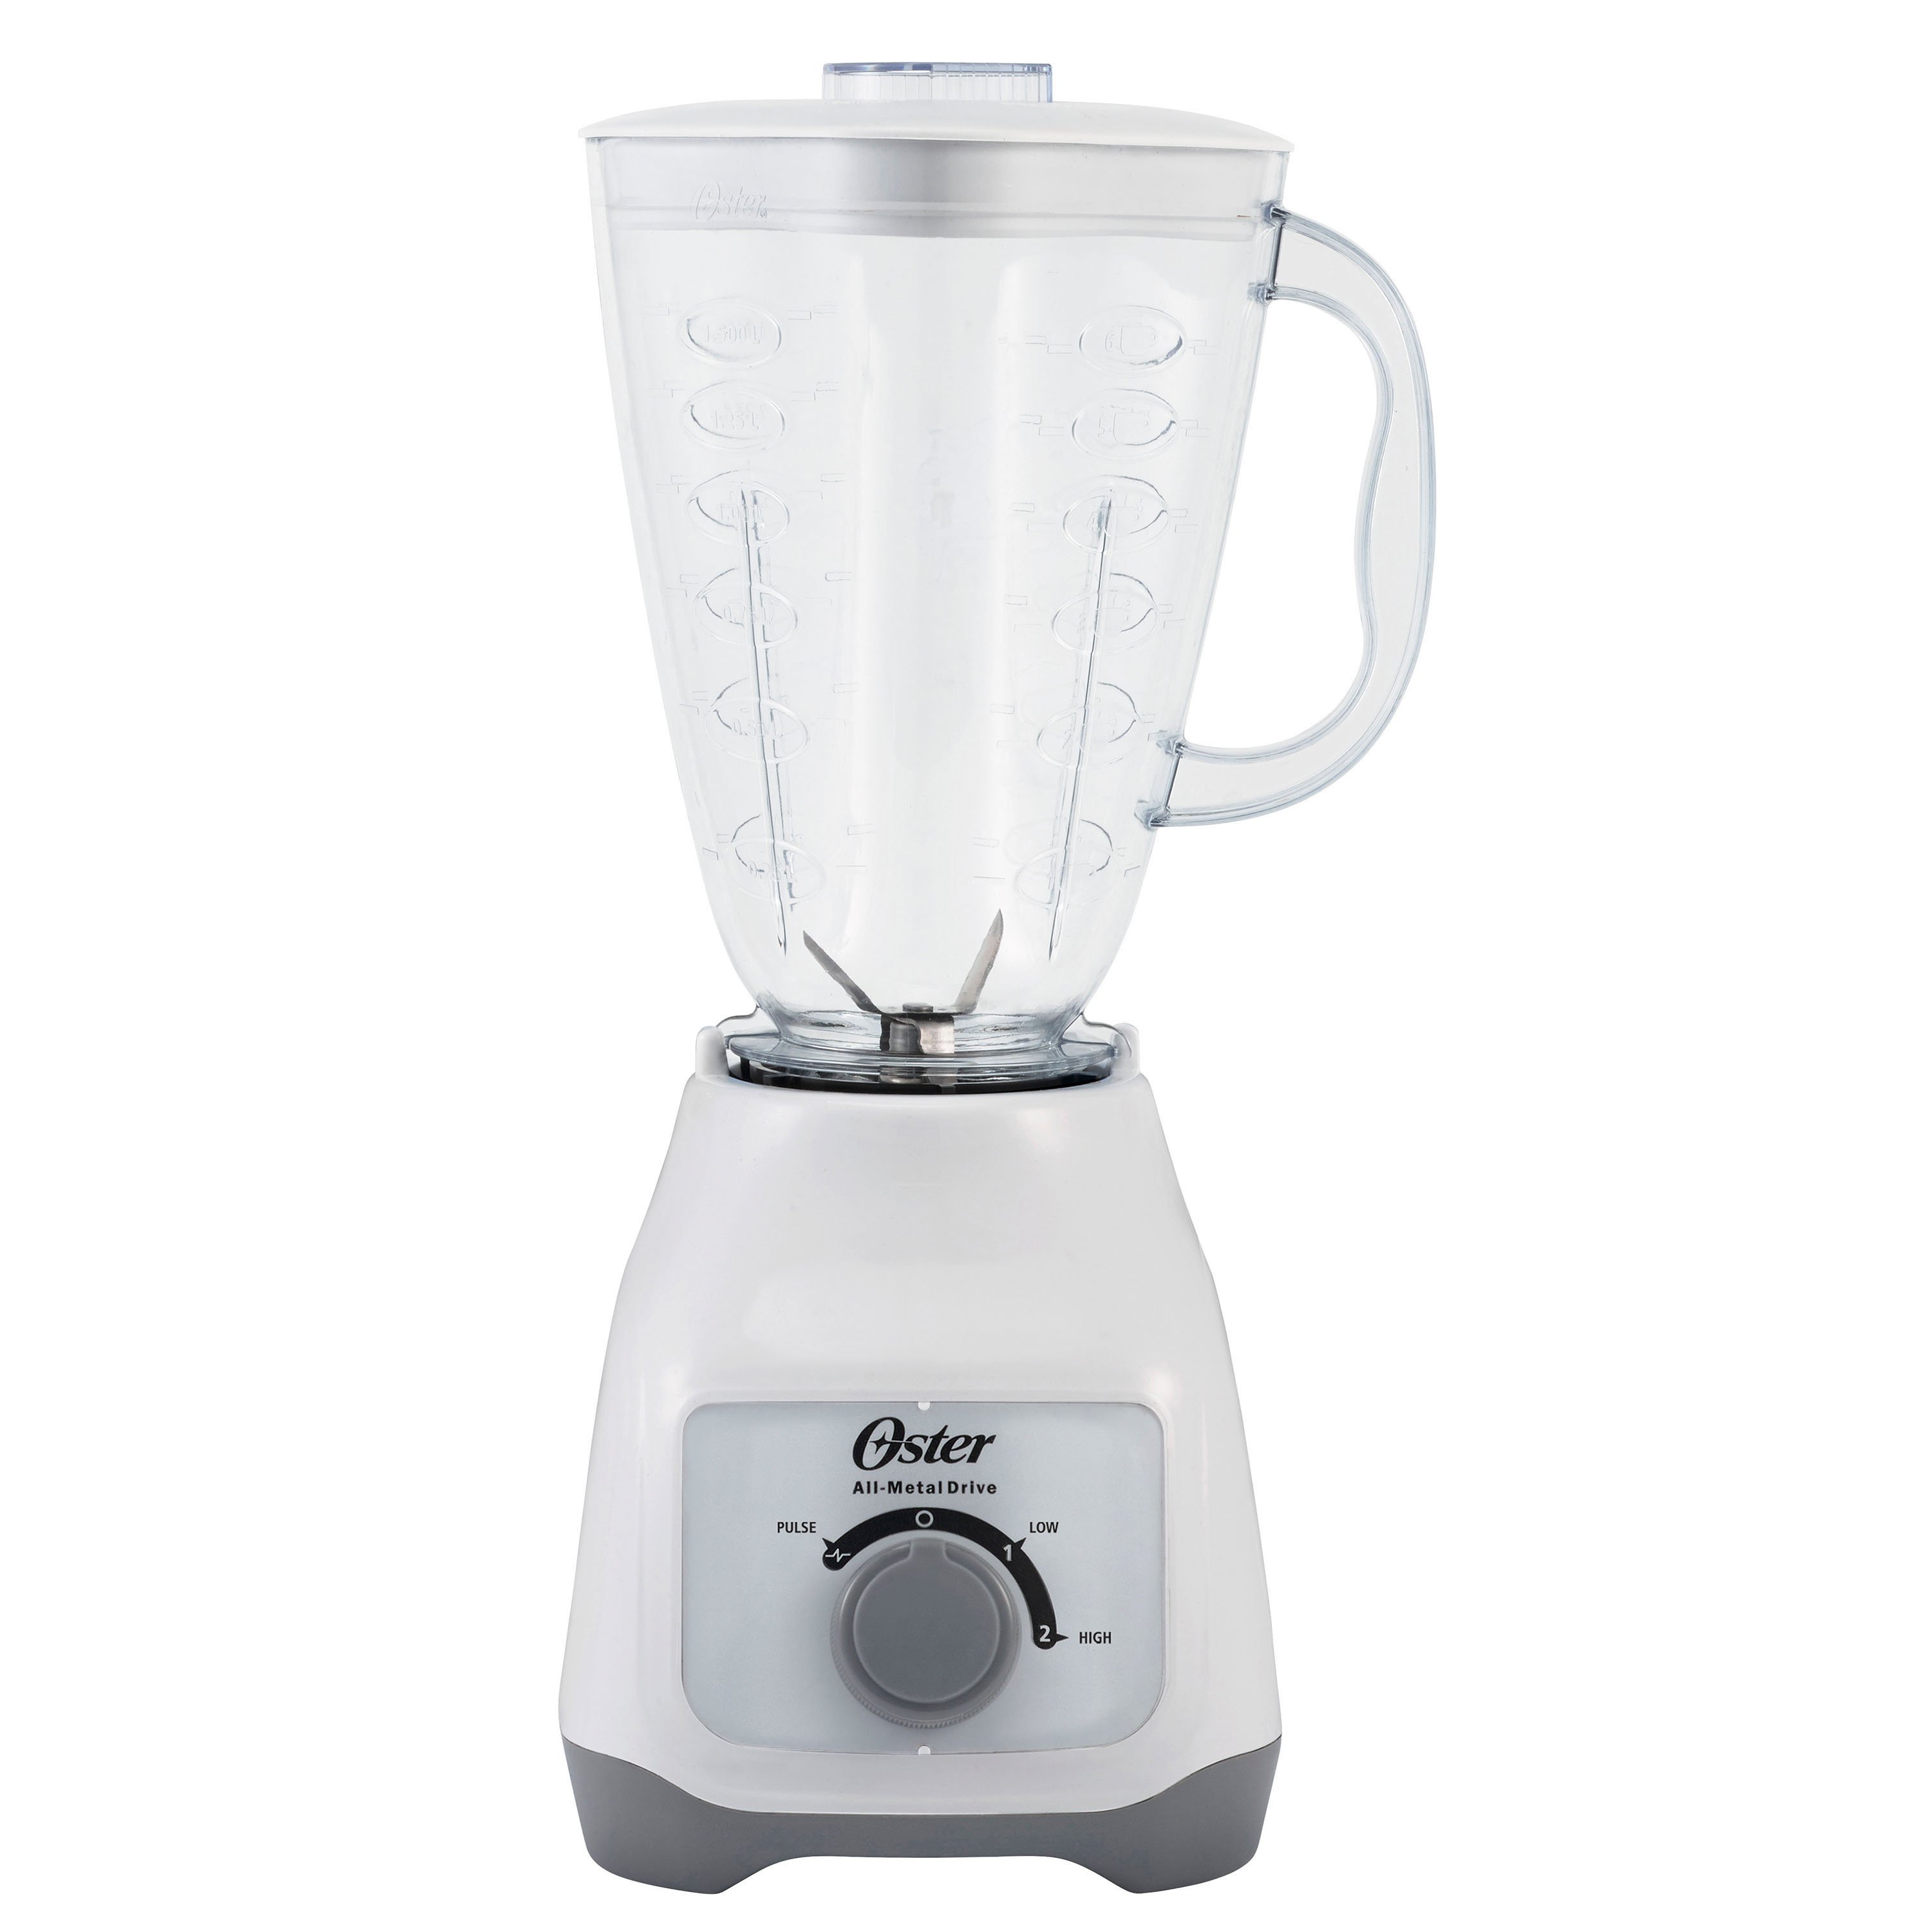 https://s7d9.scene7.com/is/image/NewellRubbermaid/2195808_Oster_ClassicBlender_Lifestyle_Image_White_BLSTBKP-WR0-000_ATF_01